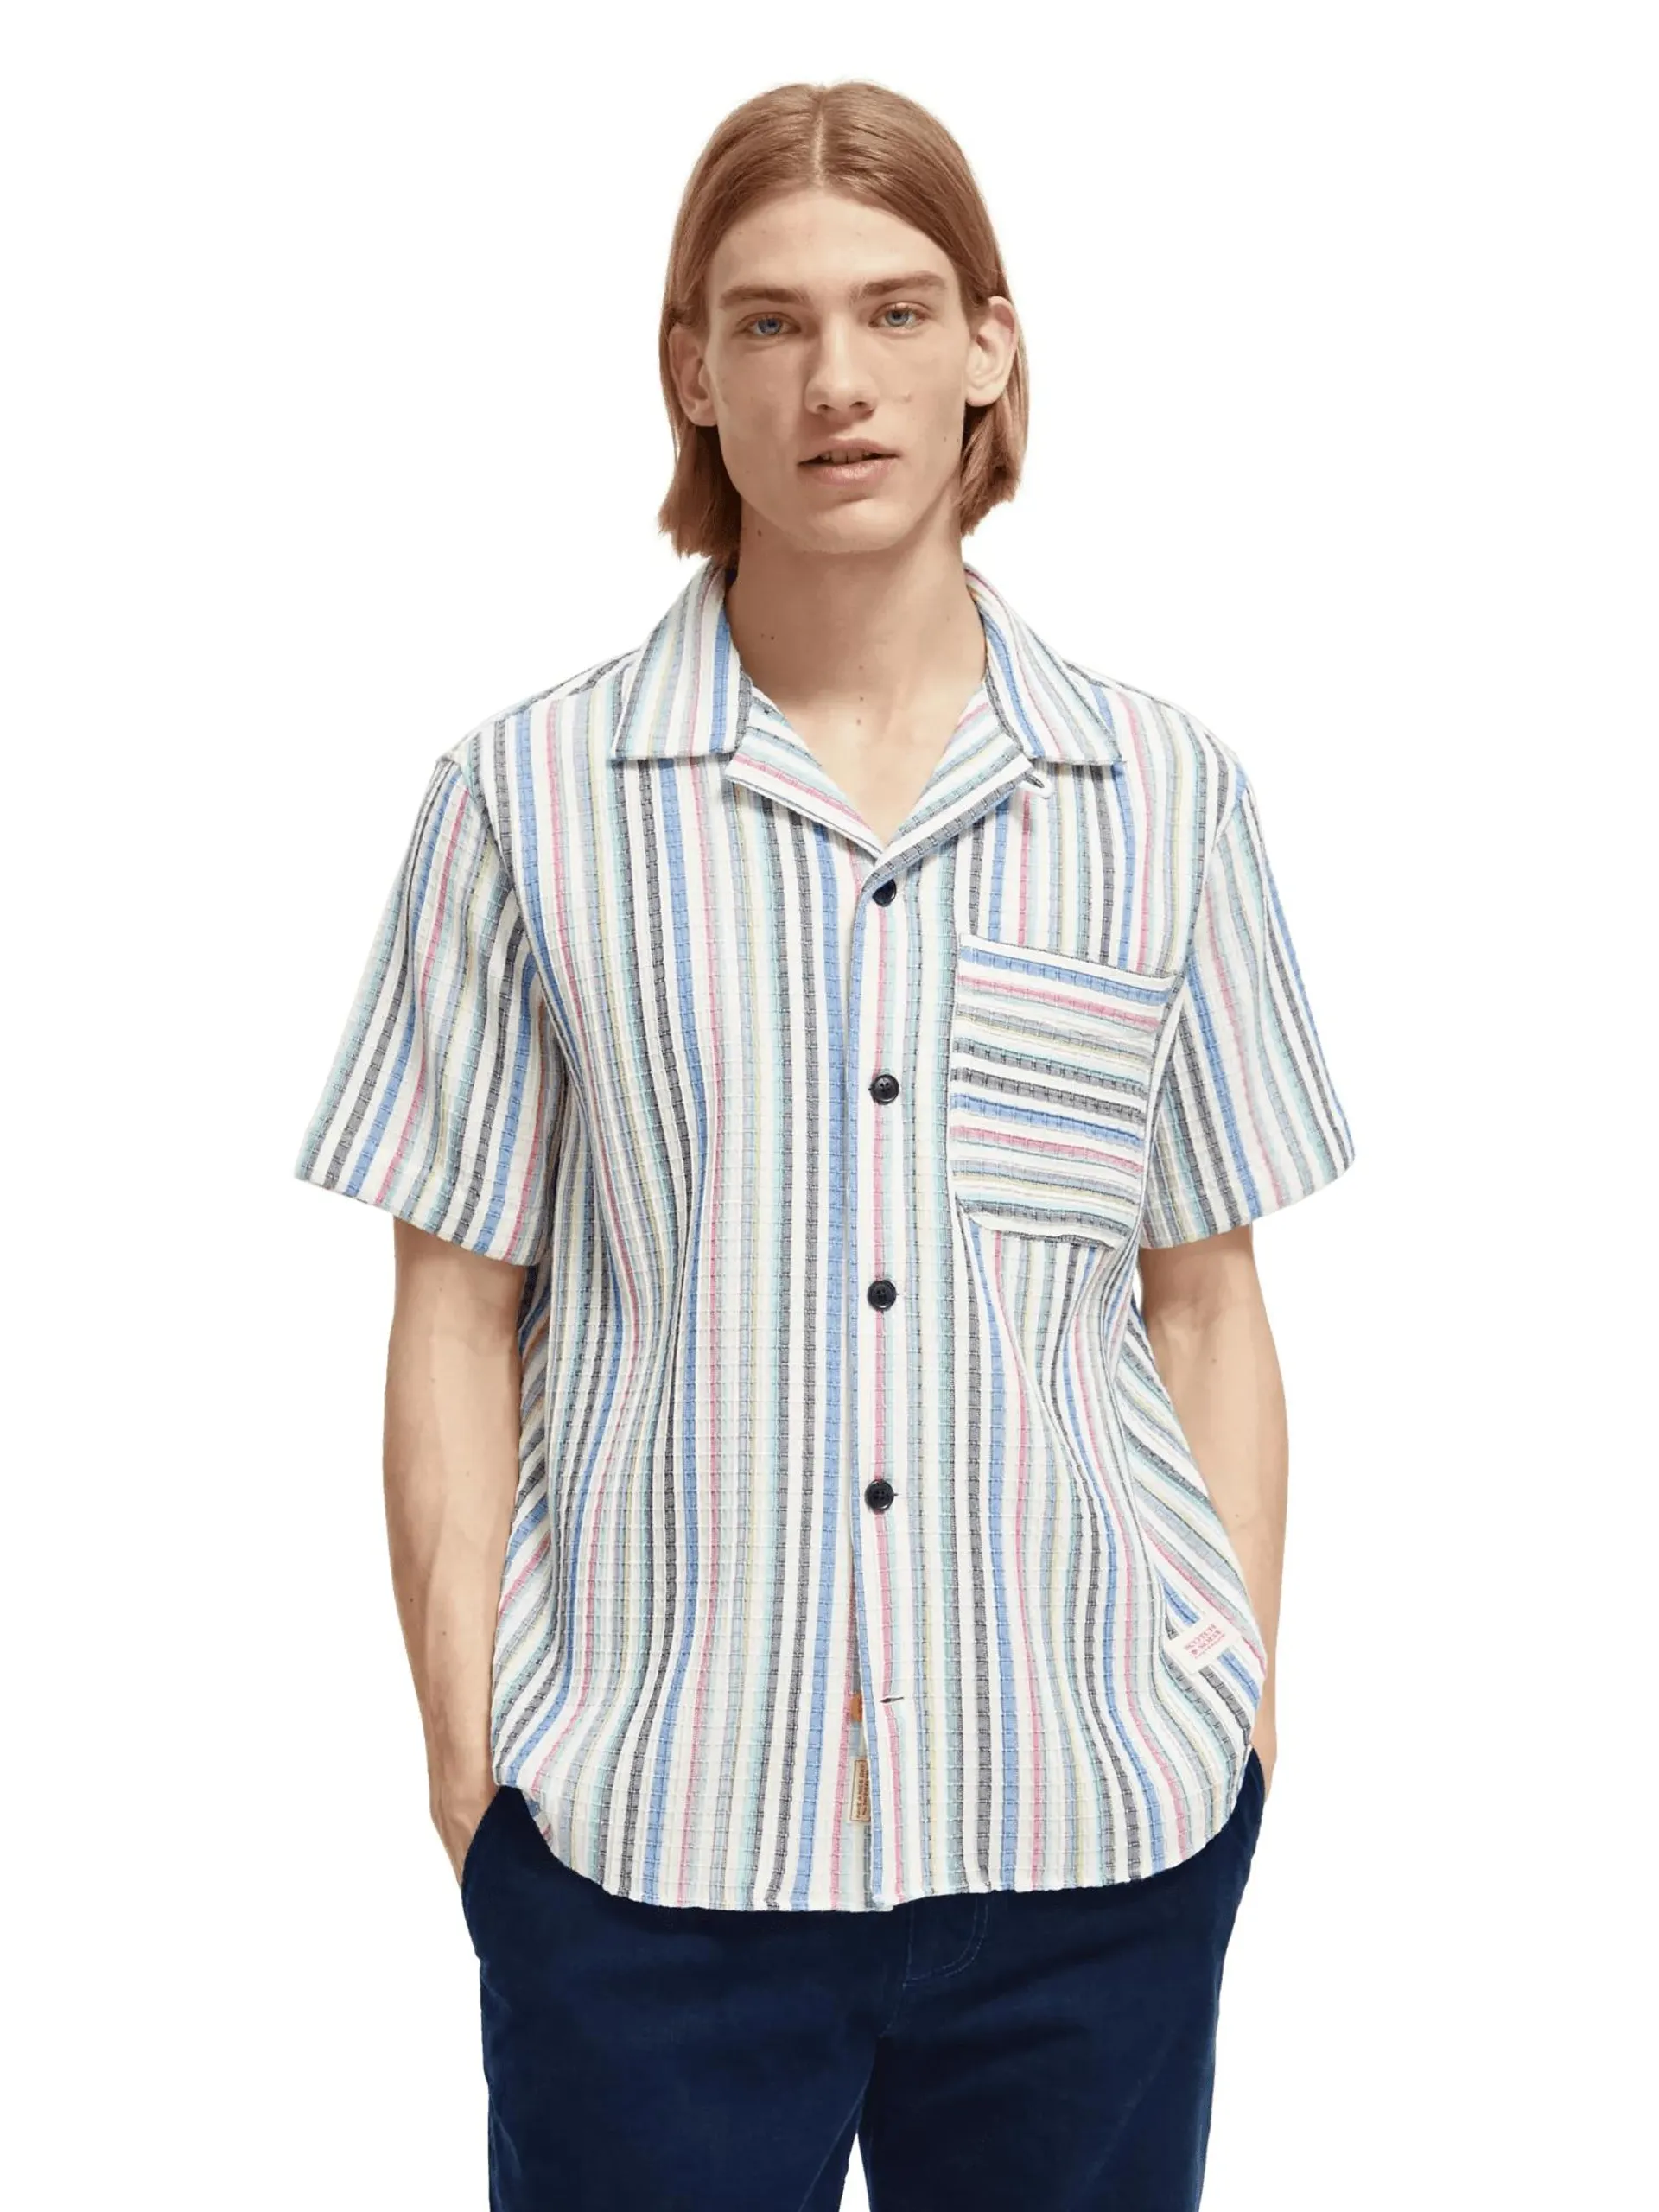 Striped structured camp shirt